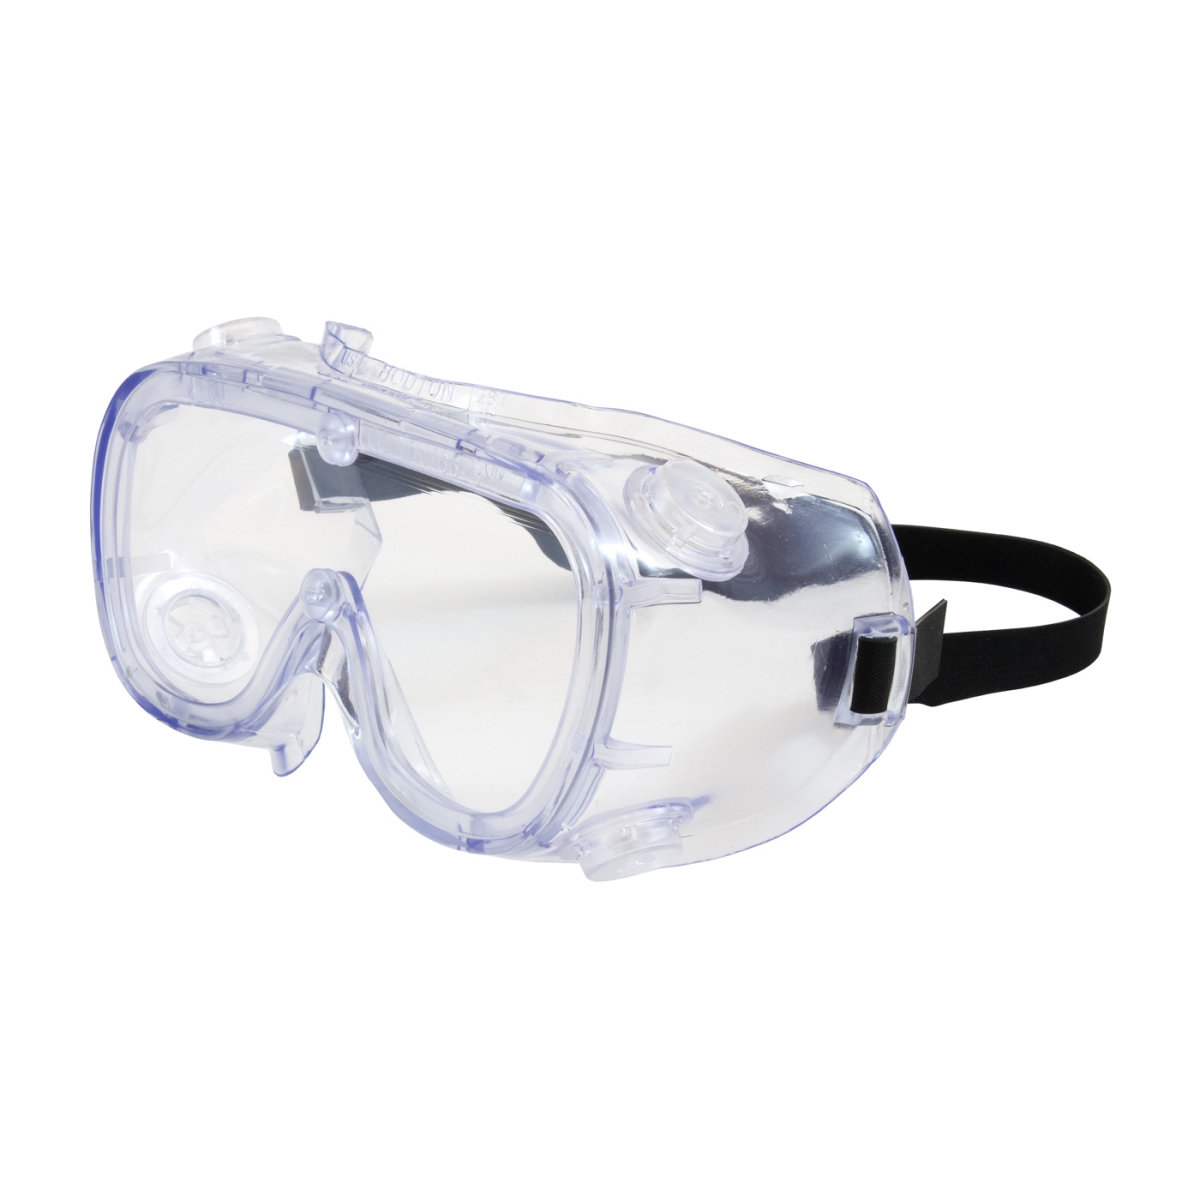 112-248-5190-300b 551 Clear Frame Indirectvent Goggle Clear Lens